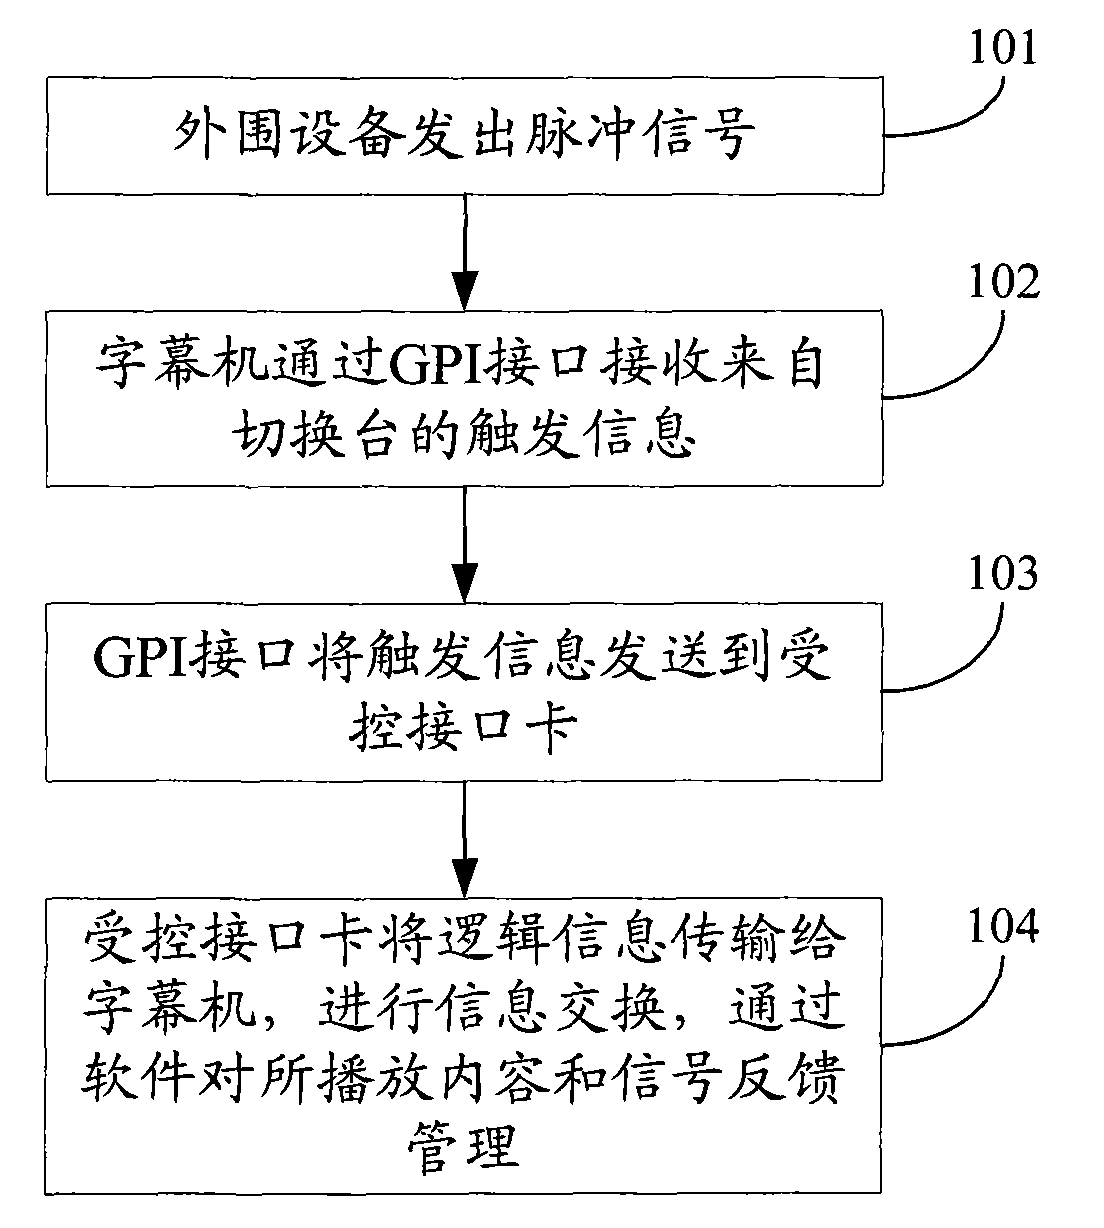 Realization method of caption machine with remote control interface